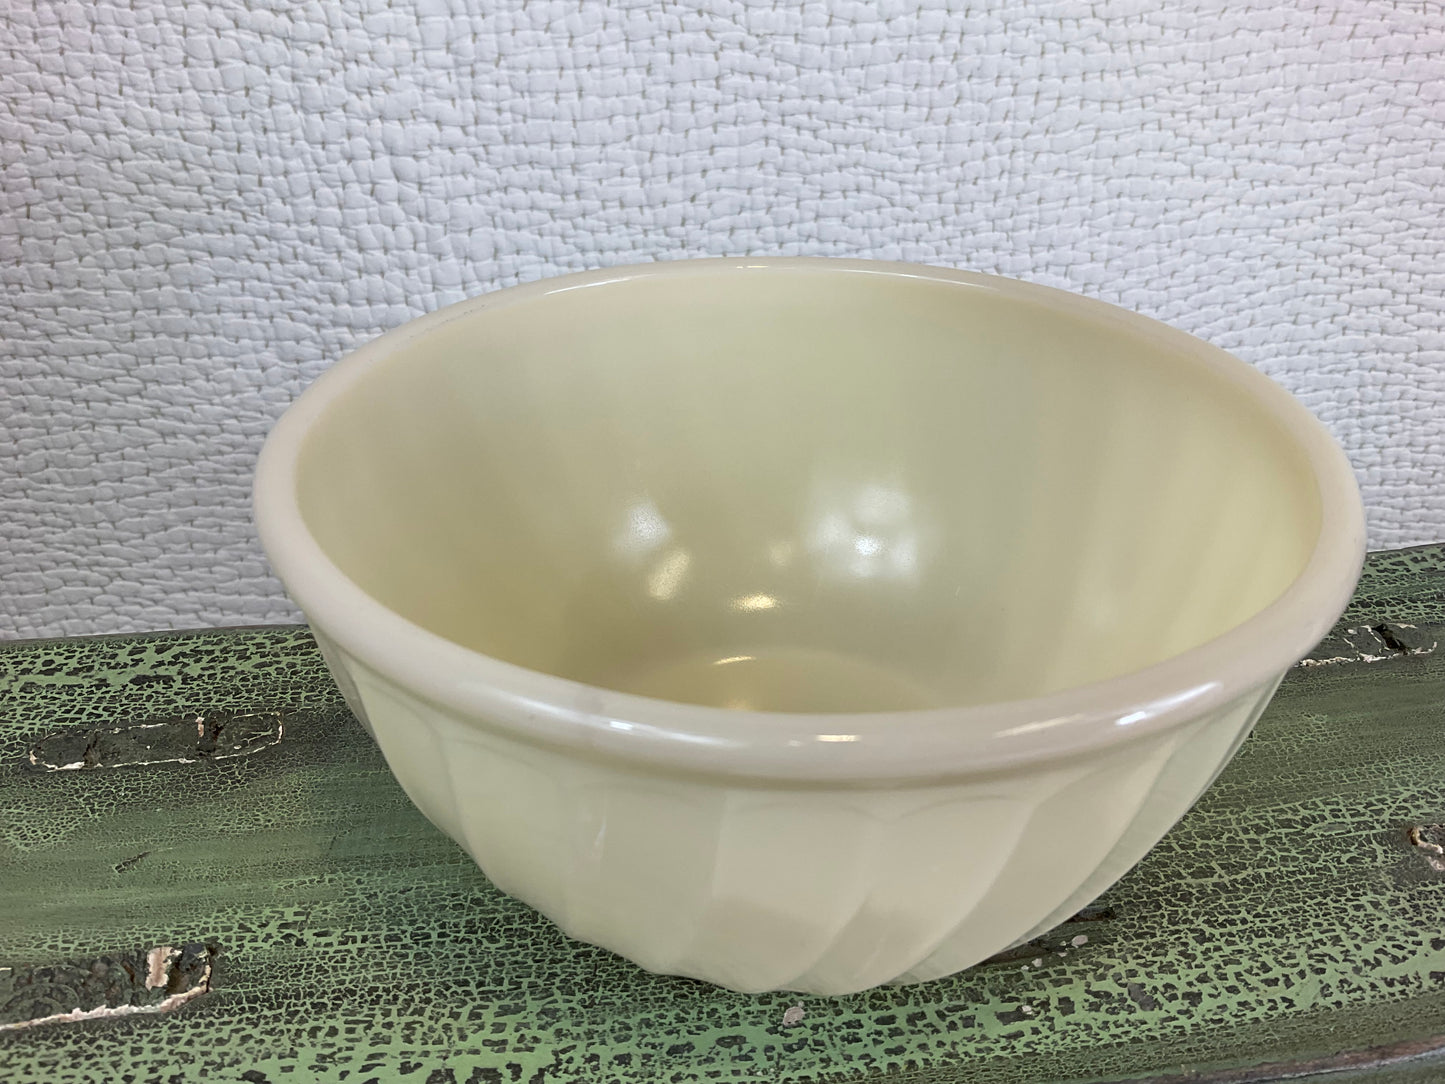 Fire King Mixing Bowls, Cream colored 2Pc